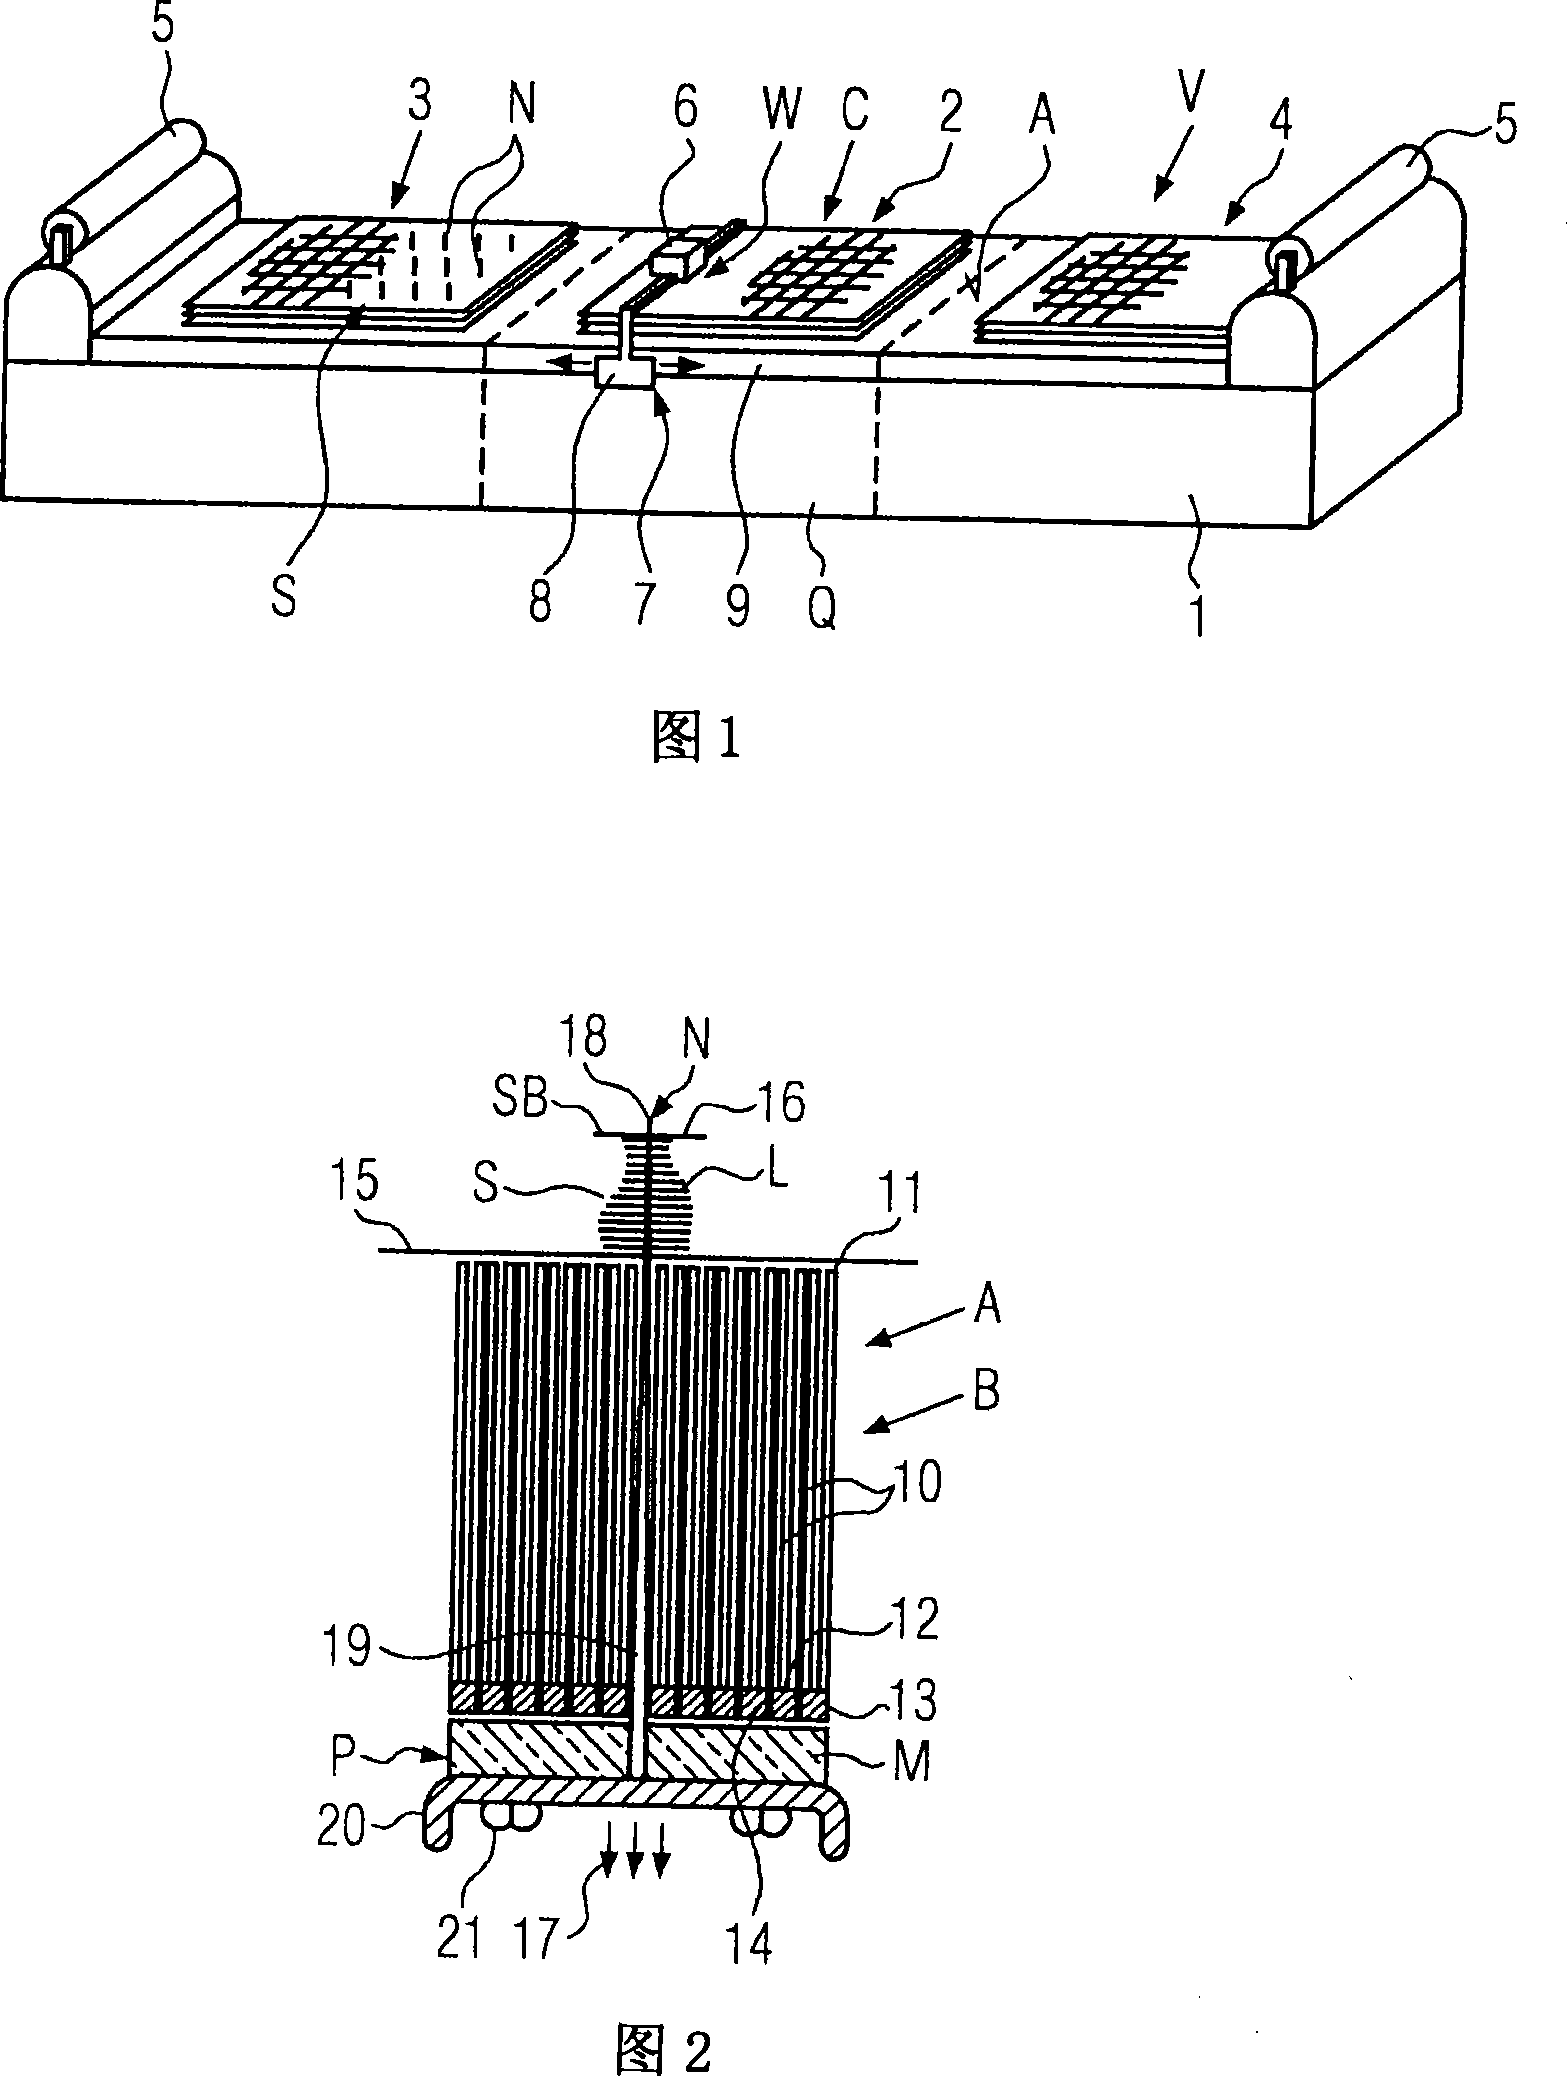 Method and apparatus for pattern cutting